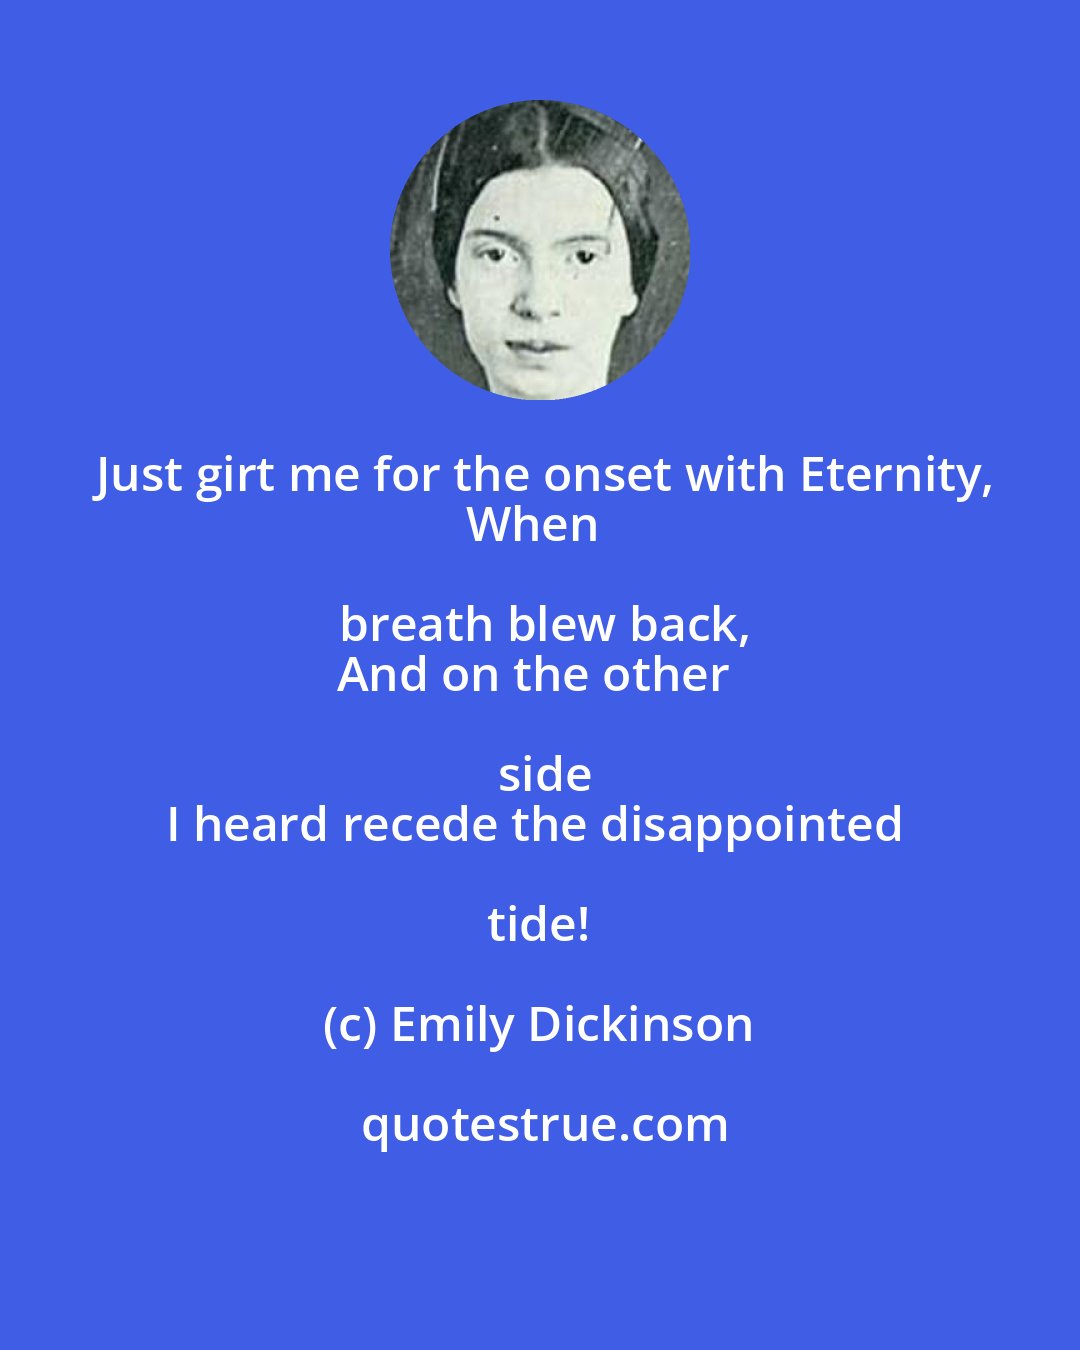 Emily Dickinson: Just girt me for the onset with Eternity,
When breath blew back,
And on the other side
I heard recede the disappointed tide!